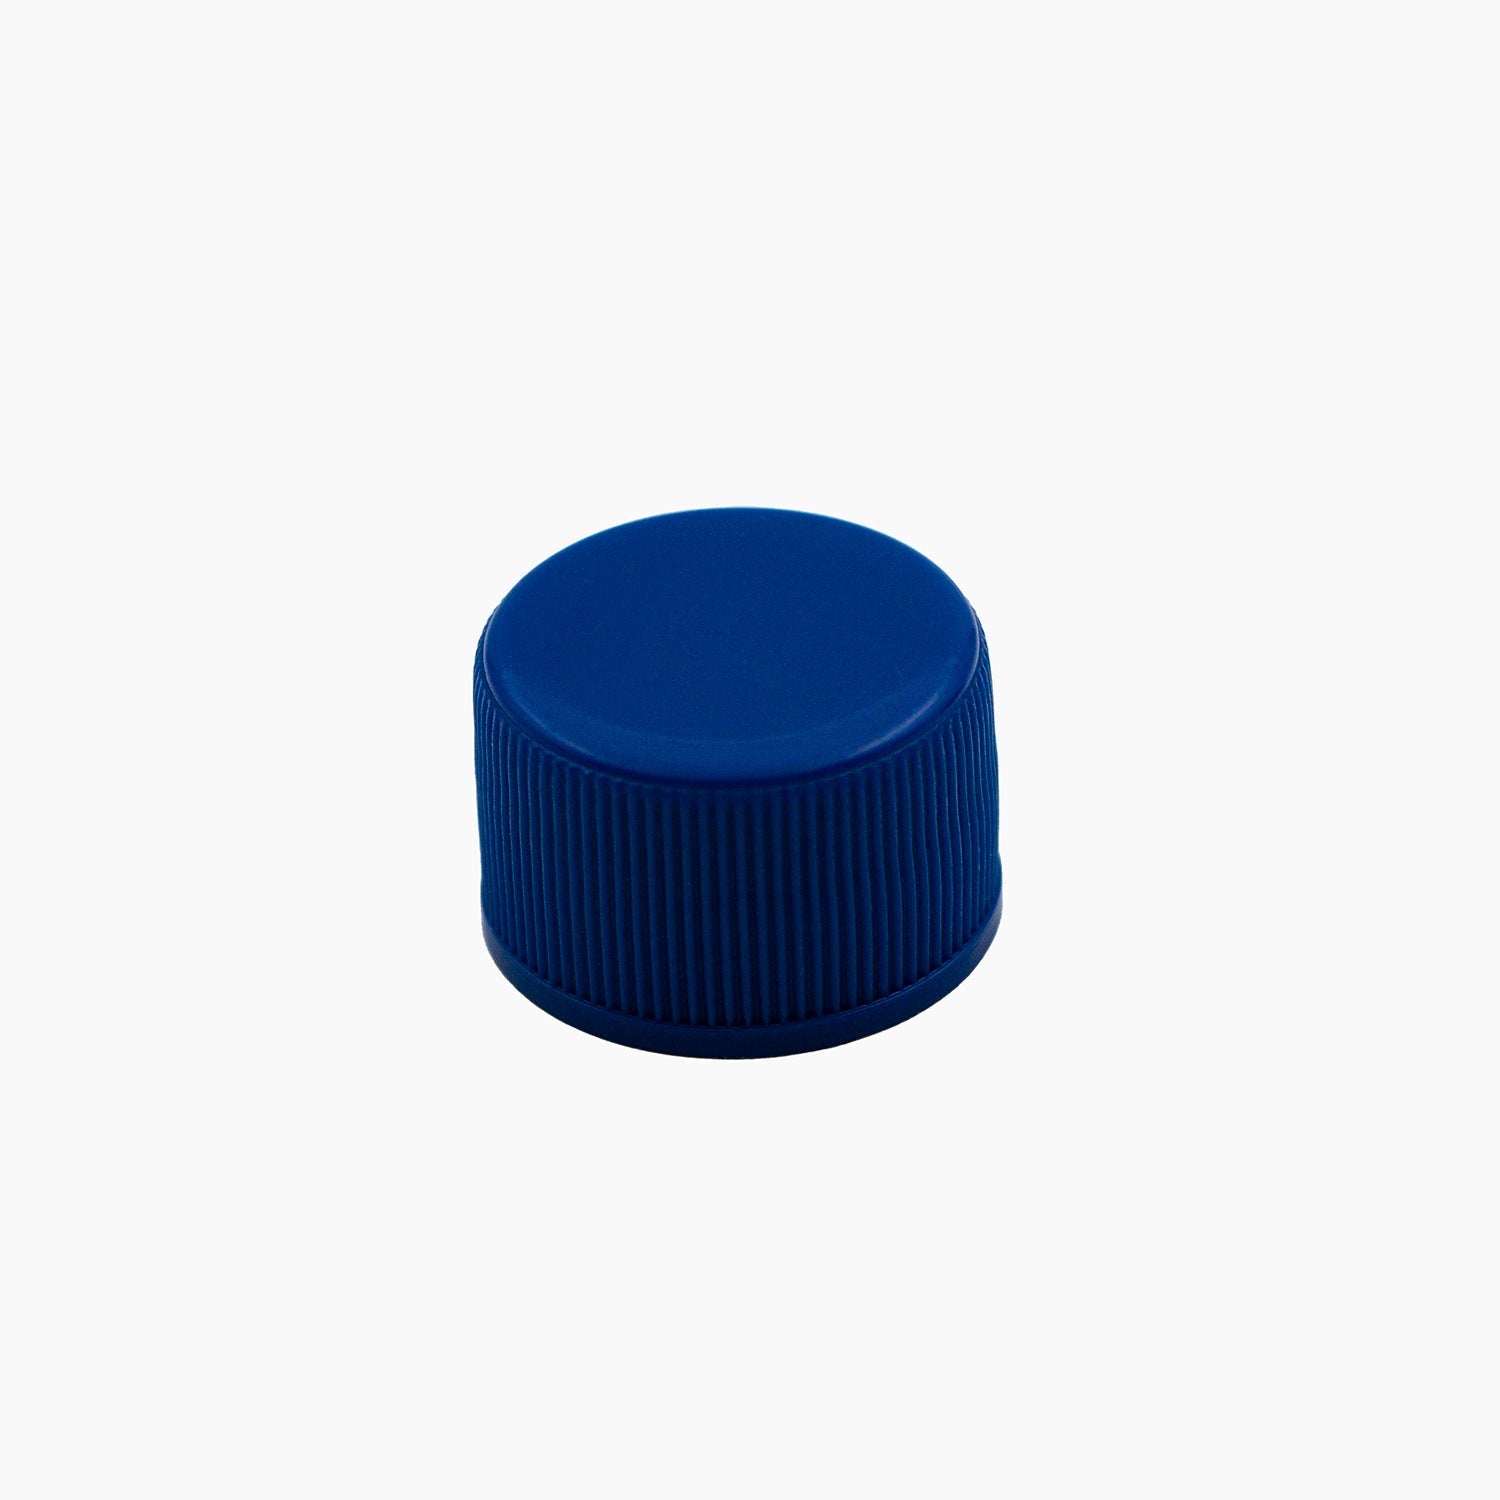 Blue 24mm Plastic Standard EPE Liner Bottle Cap On White Background | Brightpack Closures And Accessories